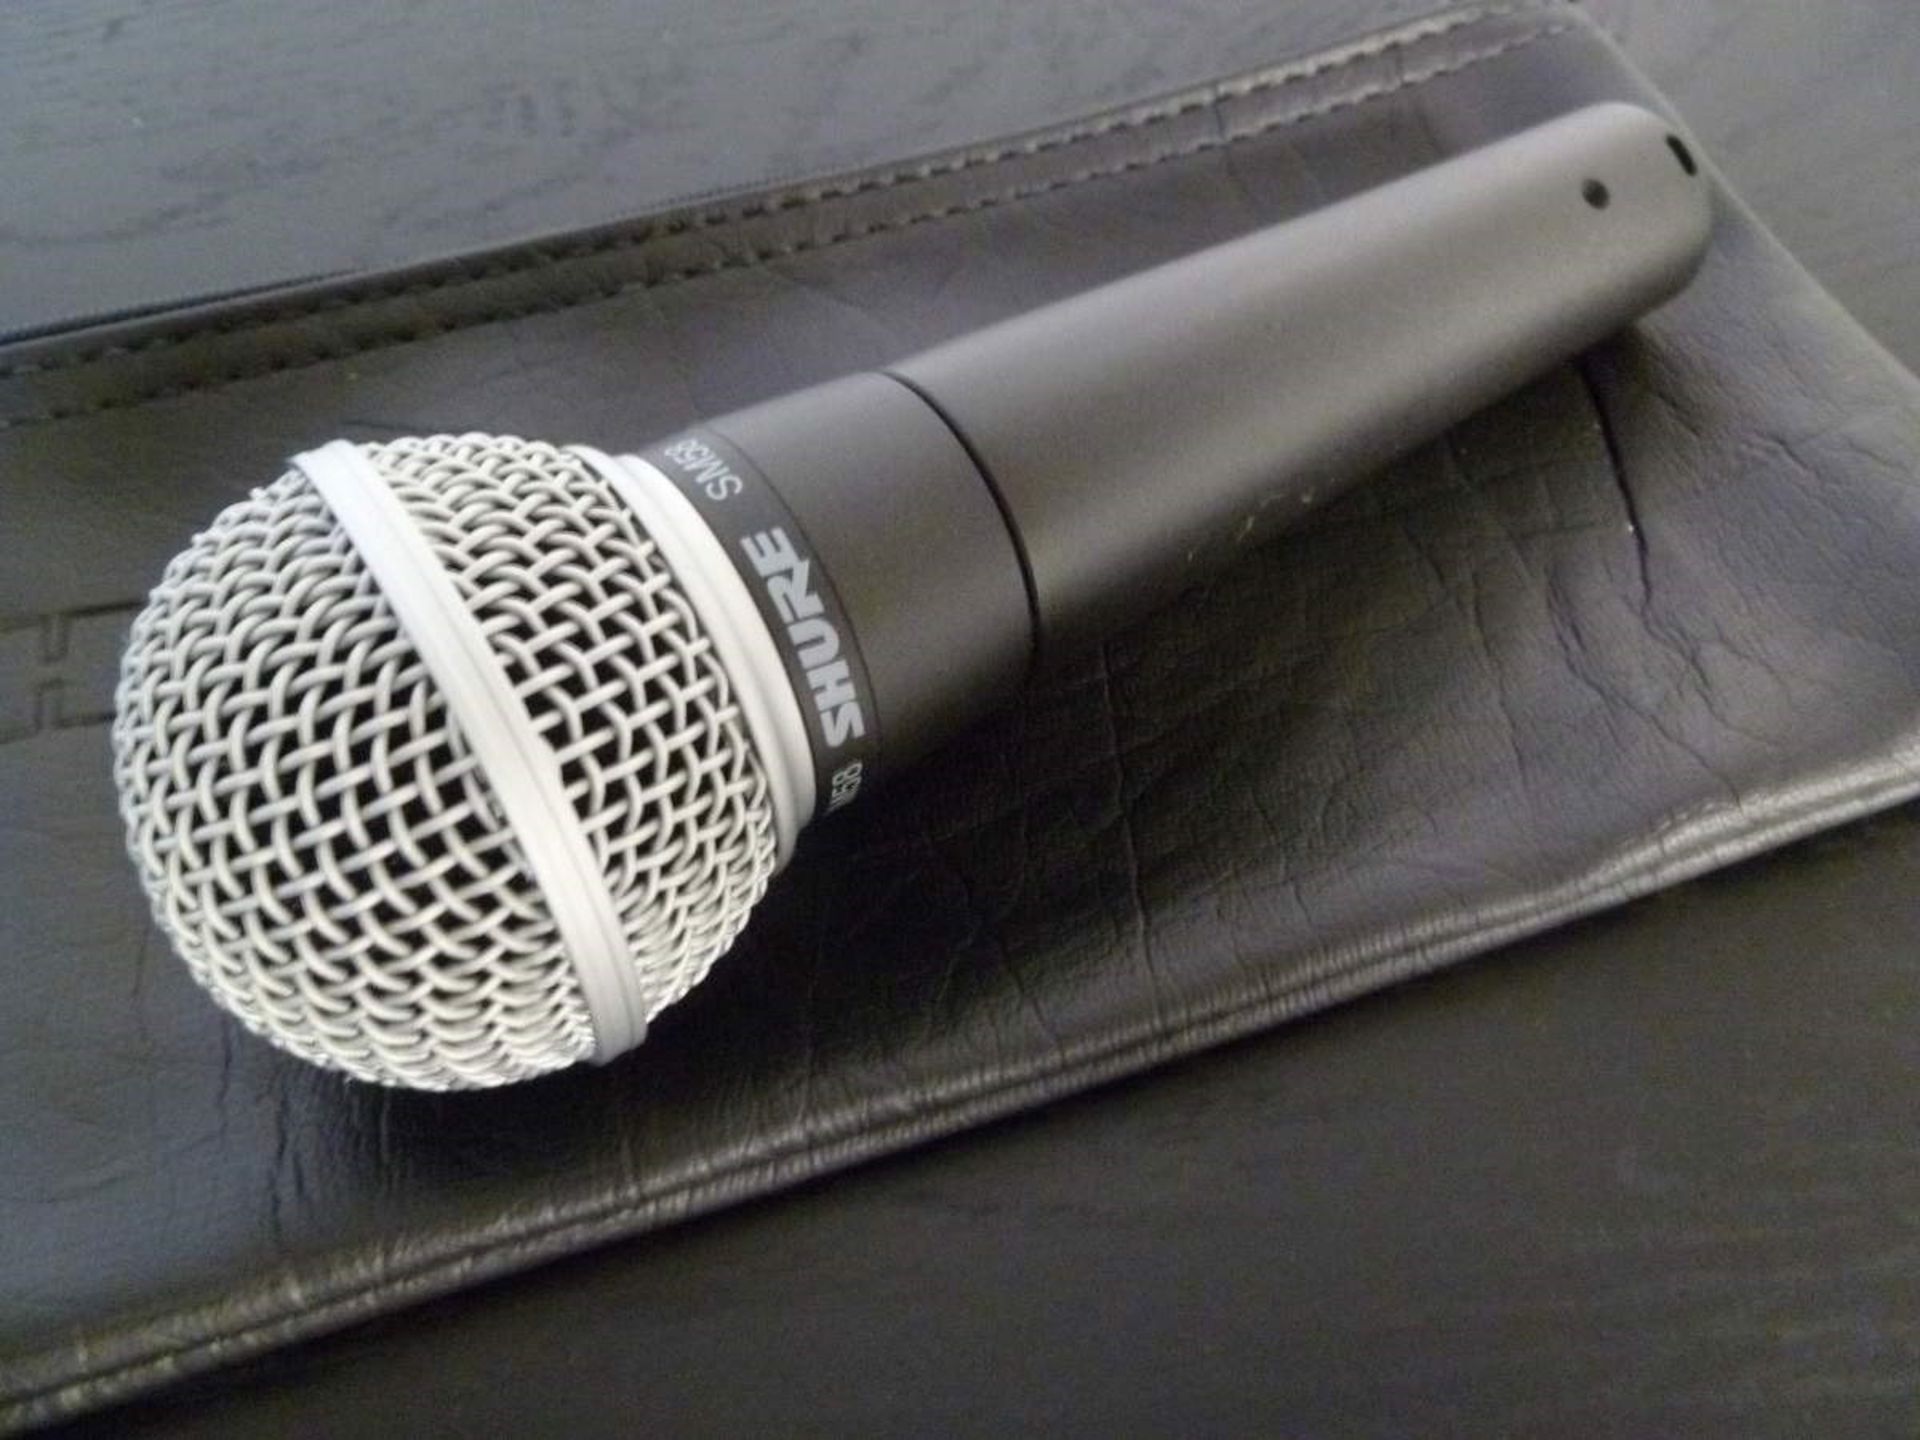 1 x Shure SM-58 Microphone With Orignal Shure Bag - Ref: 715 - CL581 - Location: Altrincham